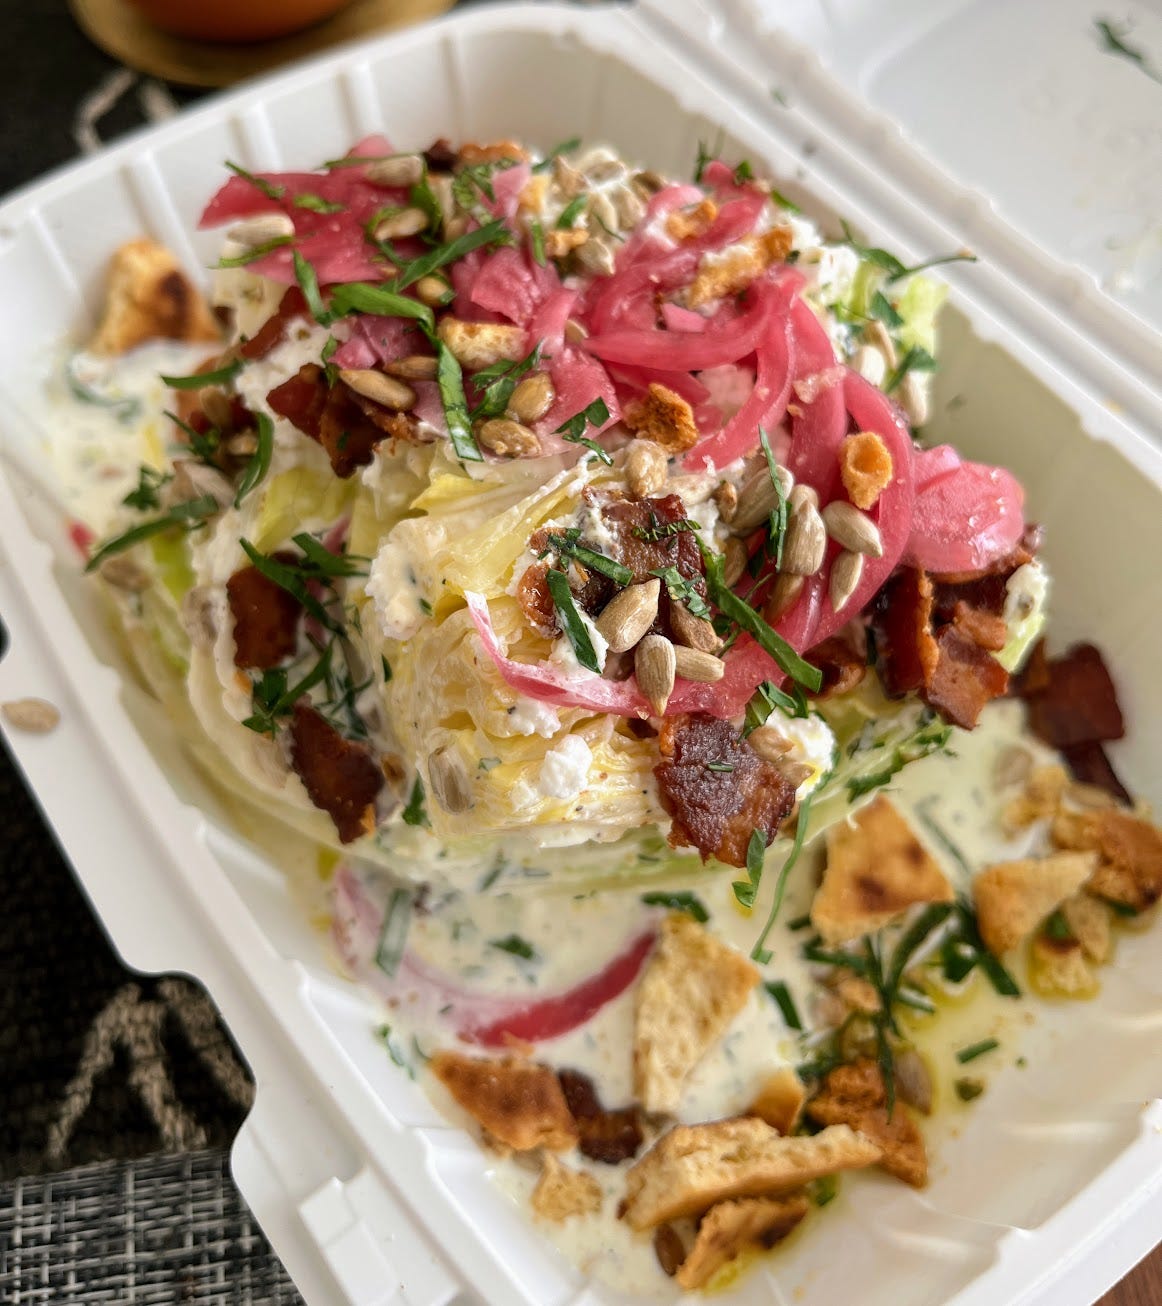 A wedge salad in a take out box